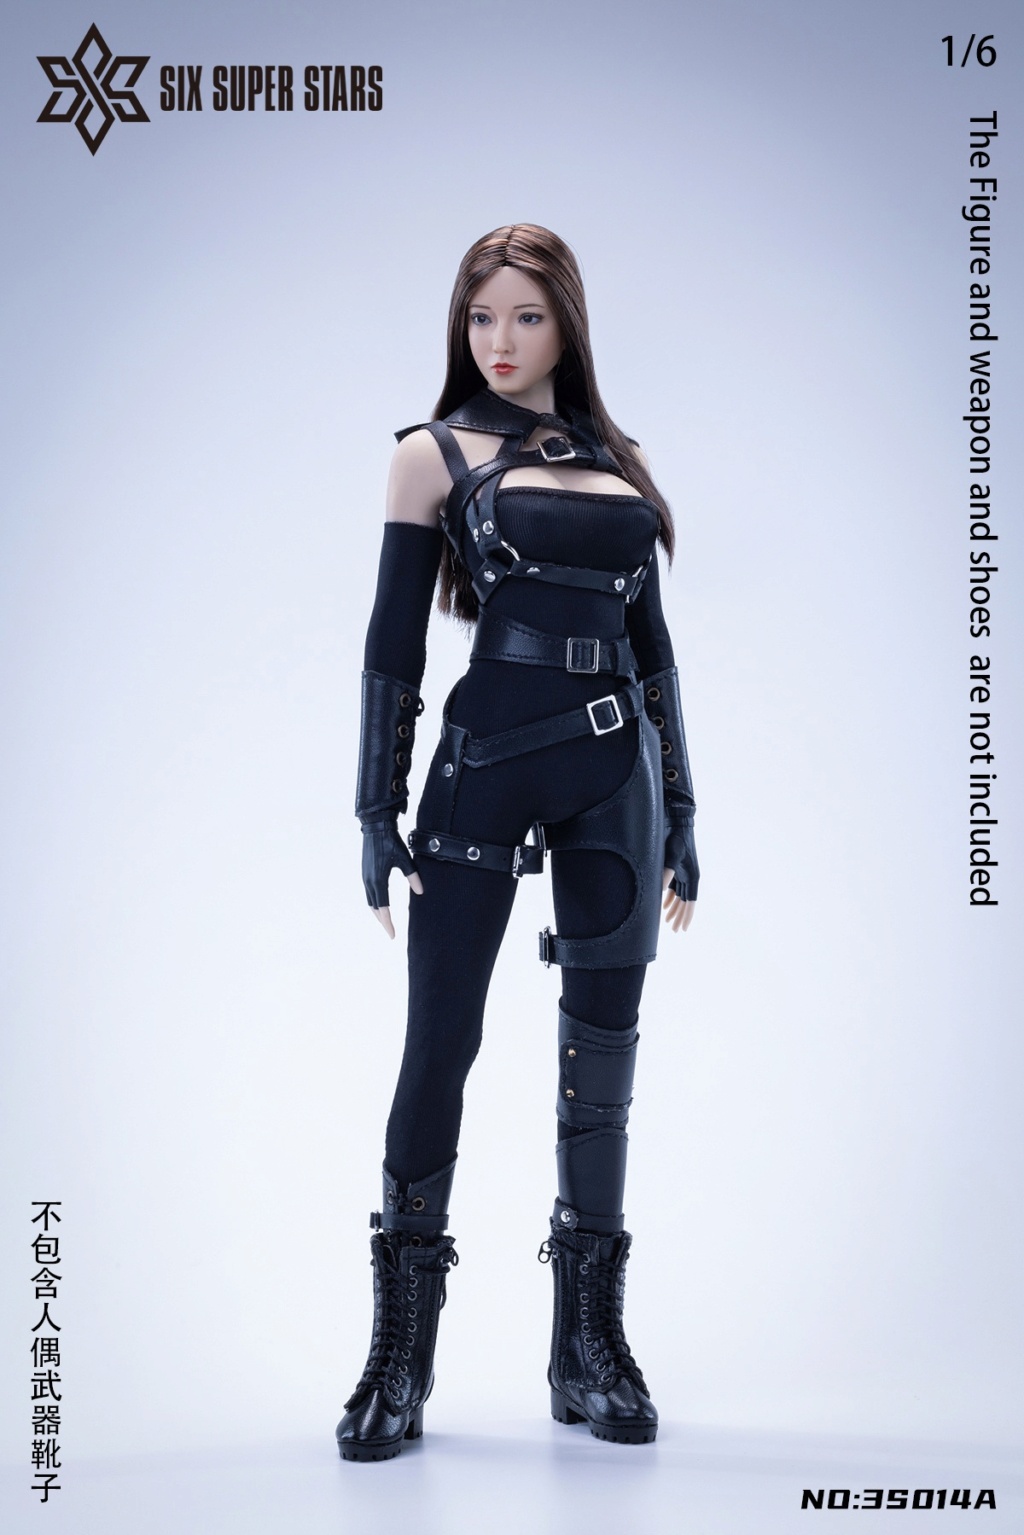 NEW PRODUCT: Six Super Stars: 1/6 Shooter Tights Female Soldier Dolls Without HeadCarving Gel Body 3S014A/B 10190411